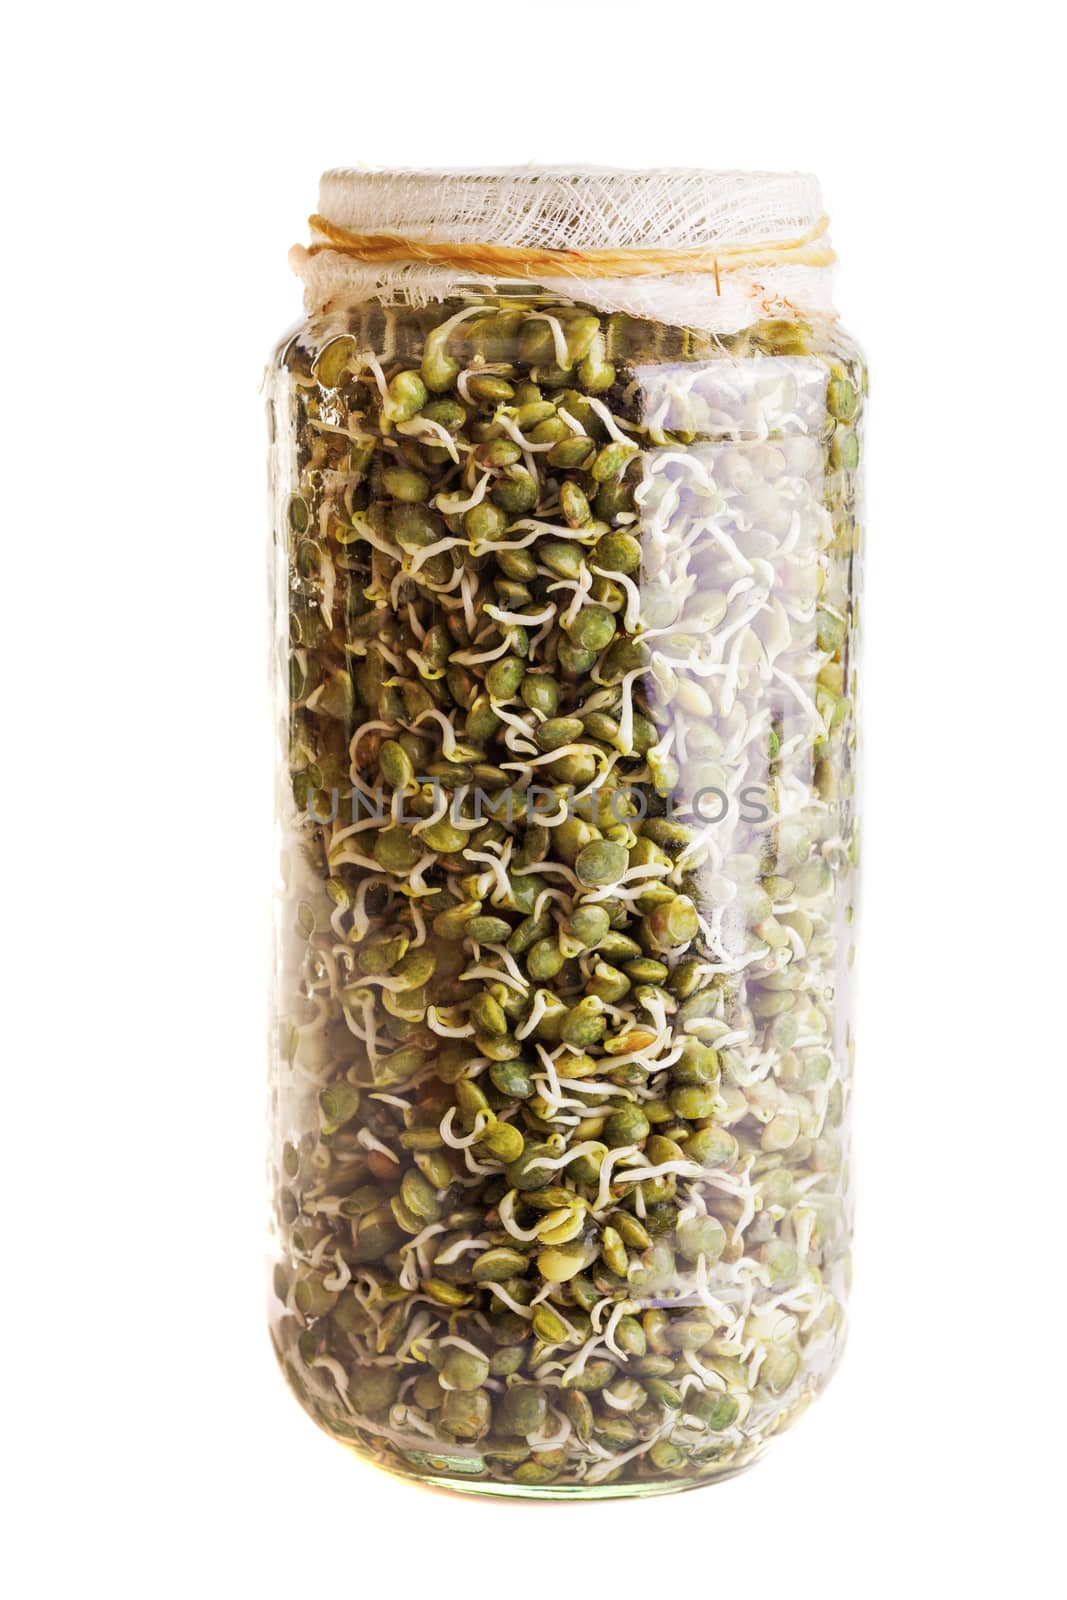 Sprouting Lentils Growing in a Glass Jar Isolated on White Background